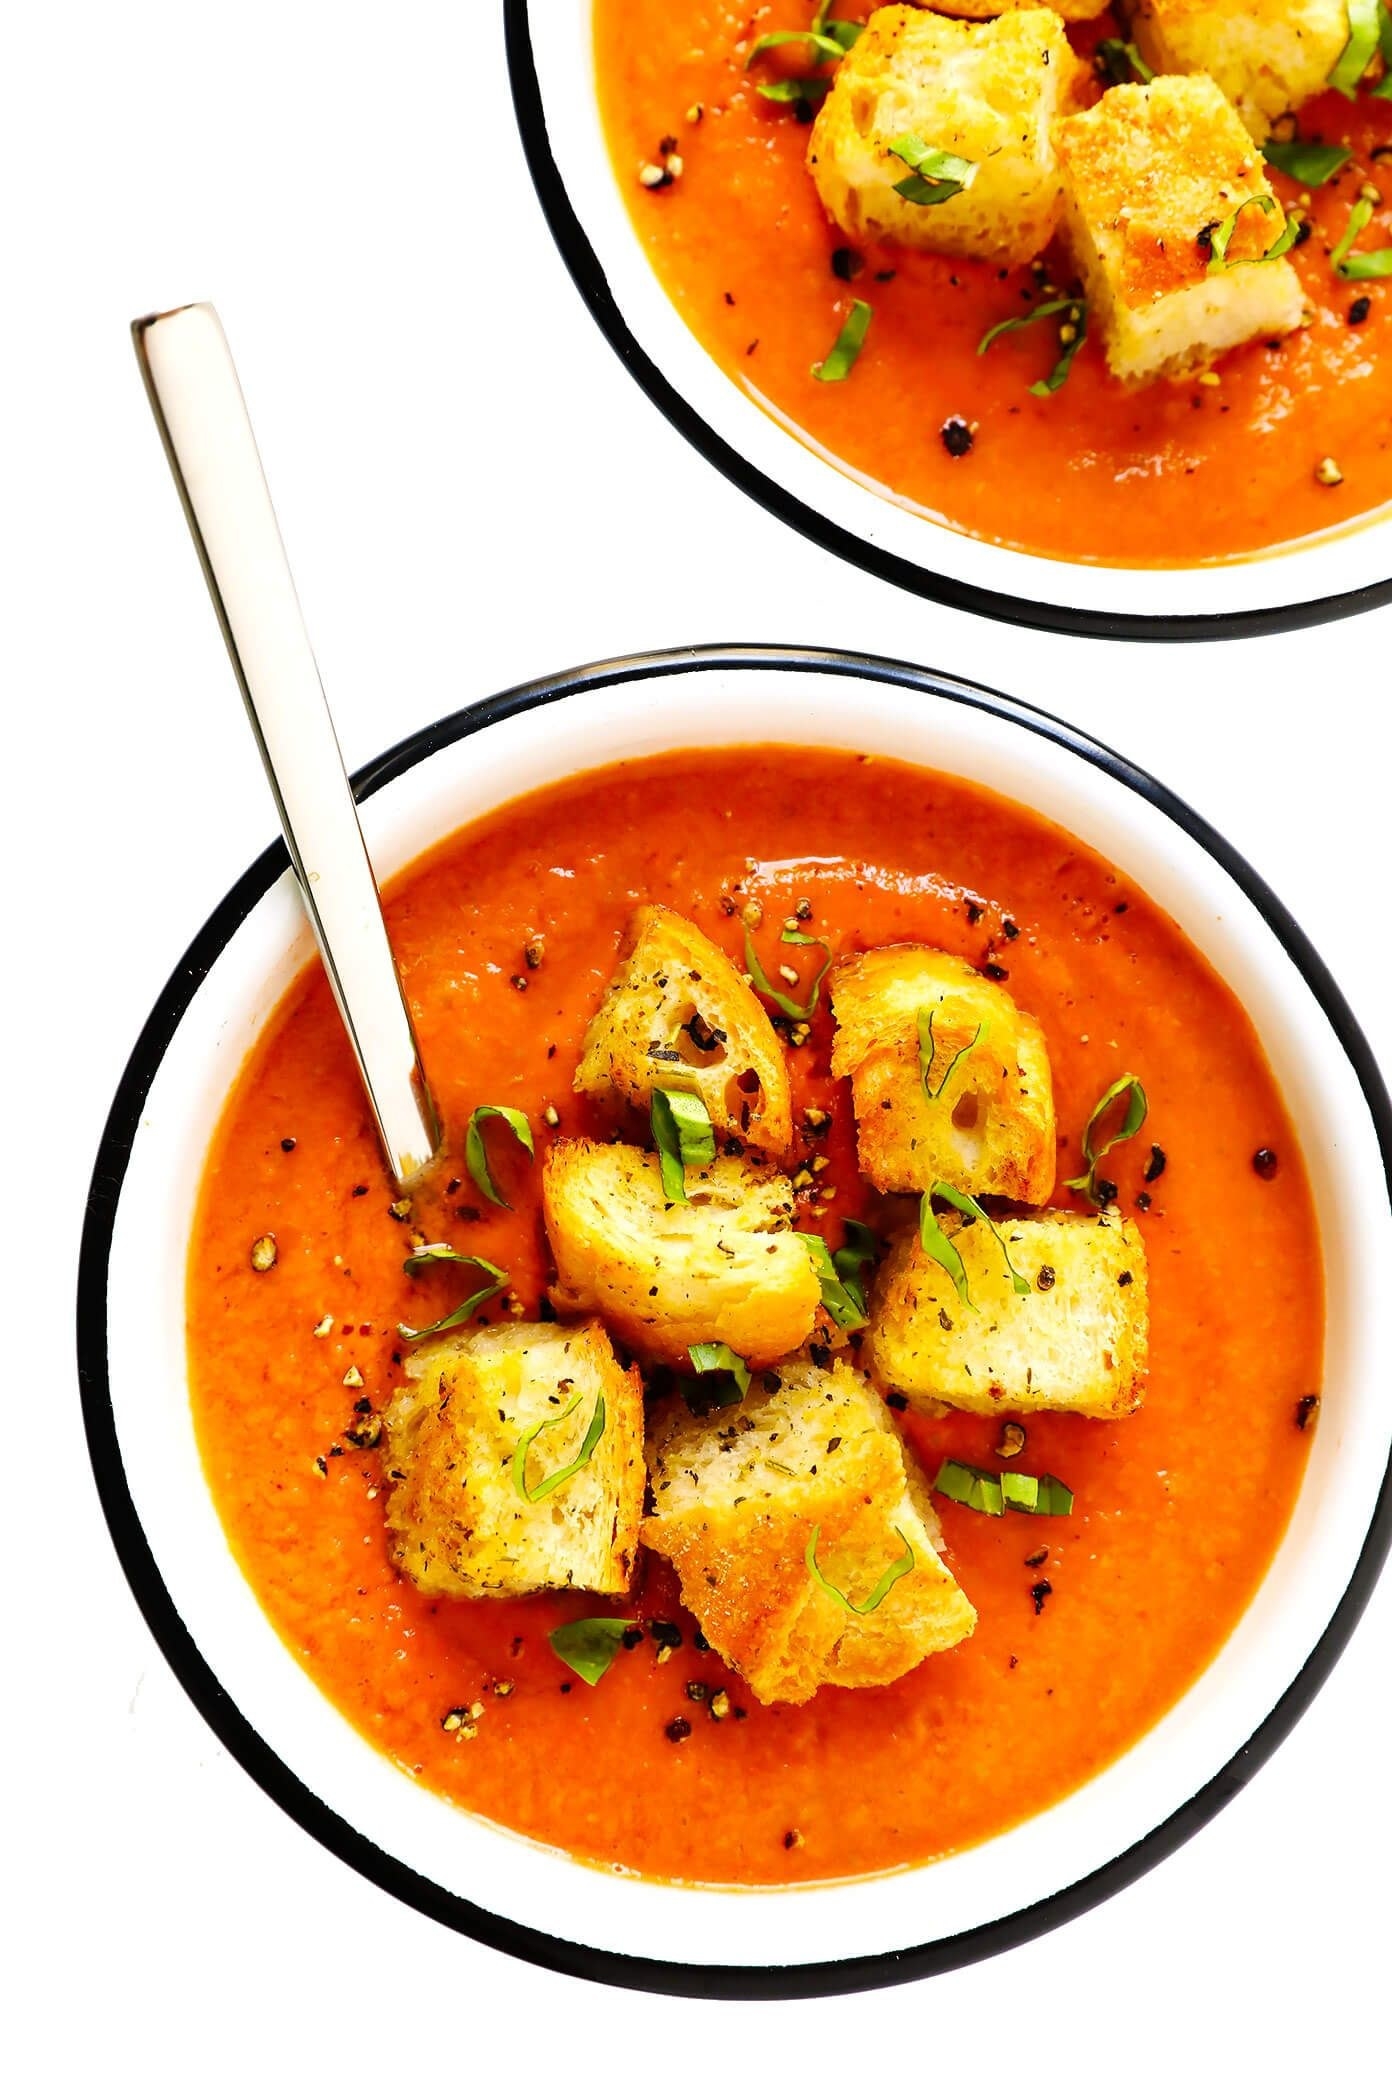 Bowls of gazpacho with croutons.